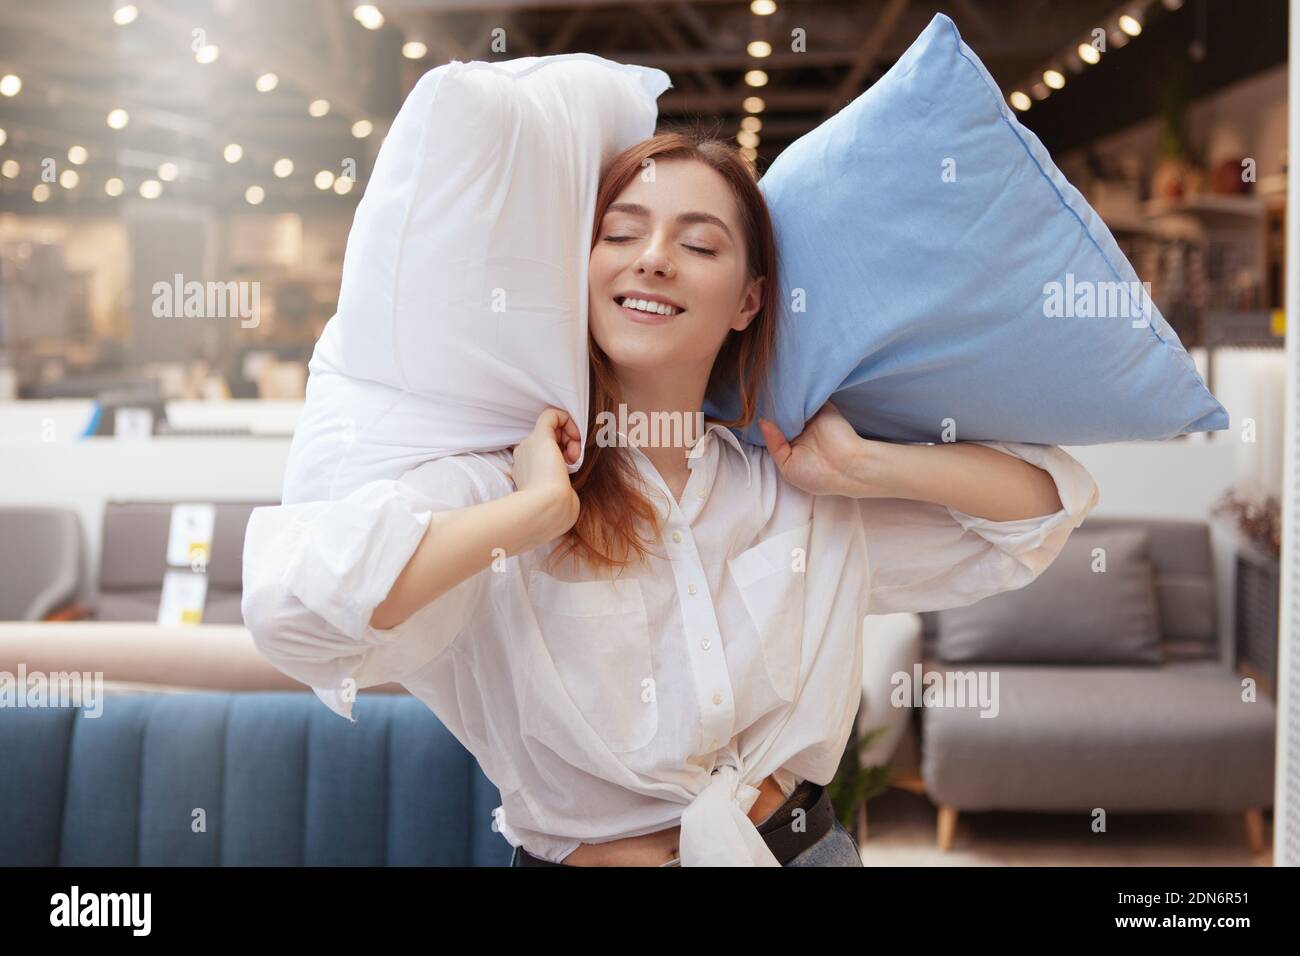 Lovely woman smiling joyfully while shopping for bedding at furniture store. Woman holding pillows, smiling with eyes shut Stock Photo